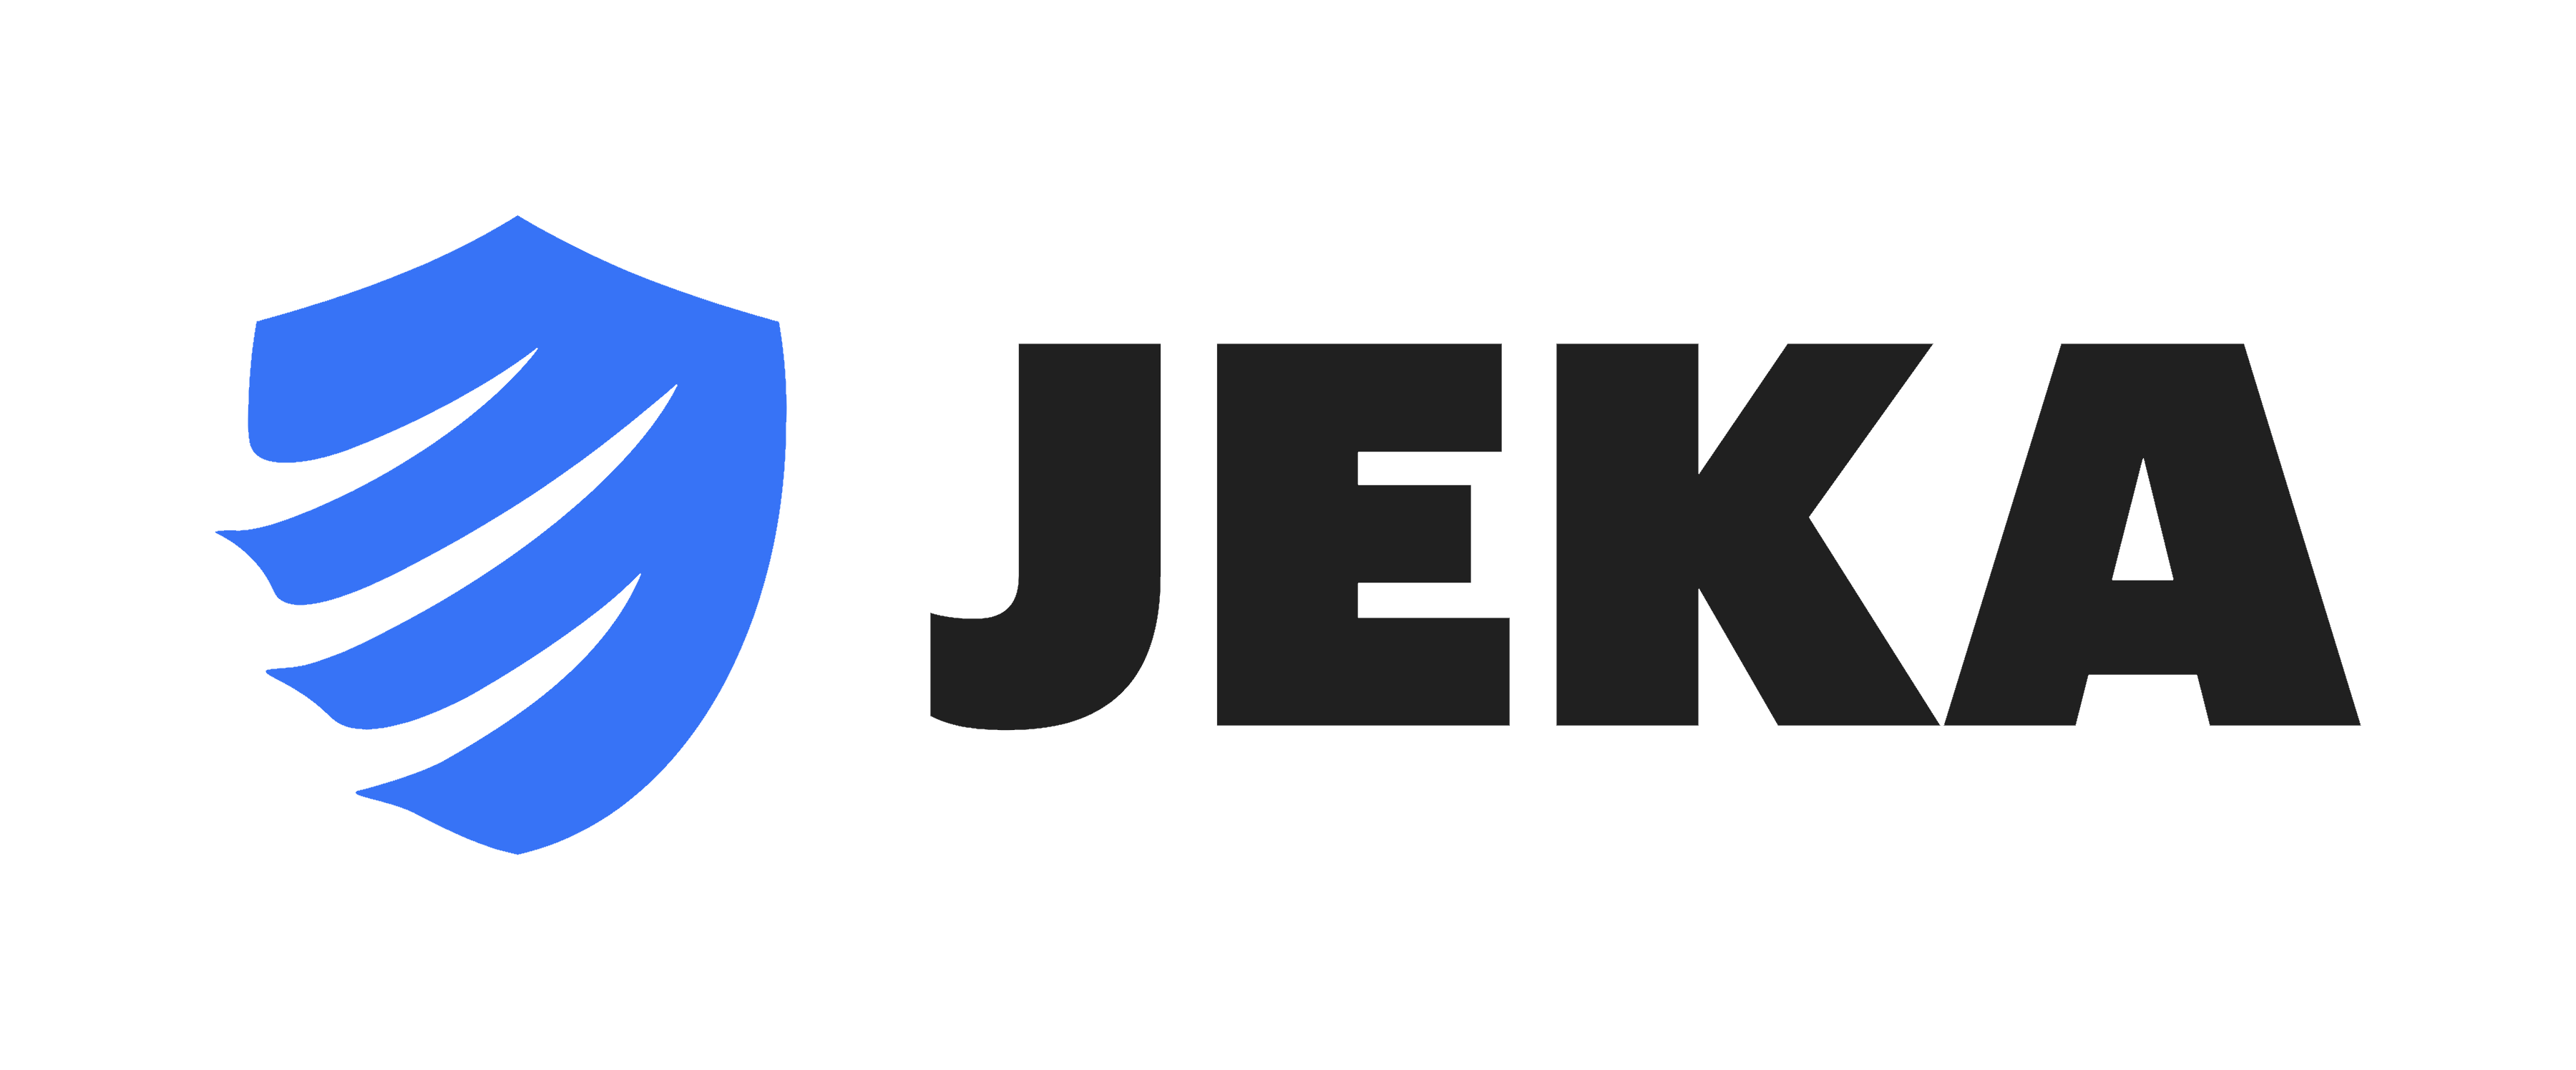 About JEKA Software, Inc. - Innovative Security Solutions